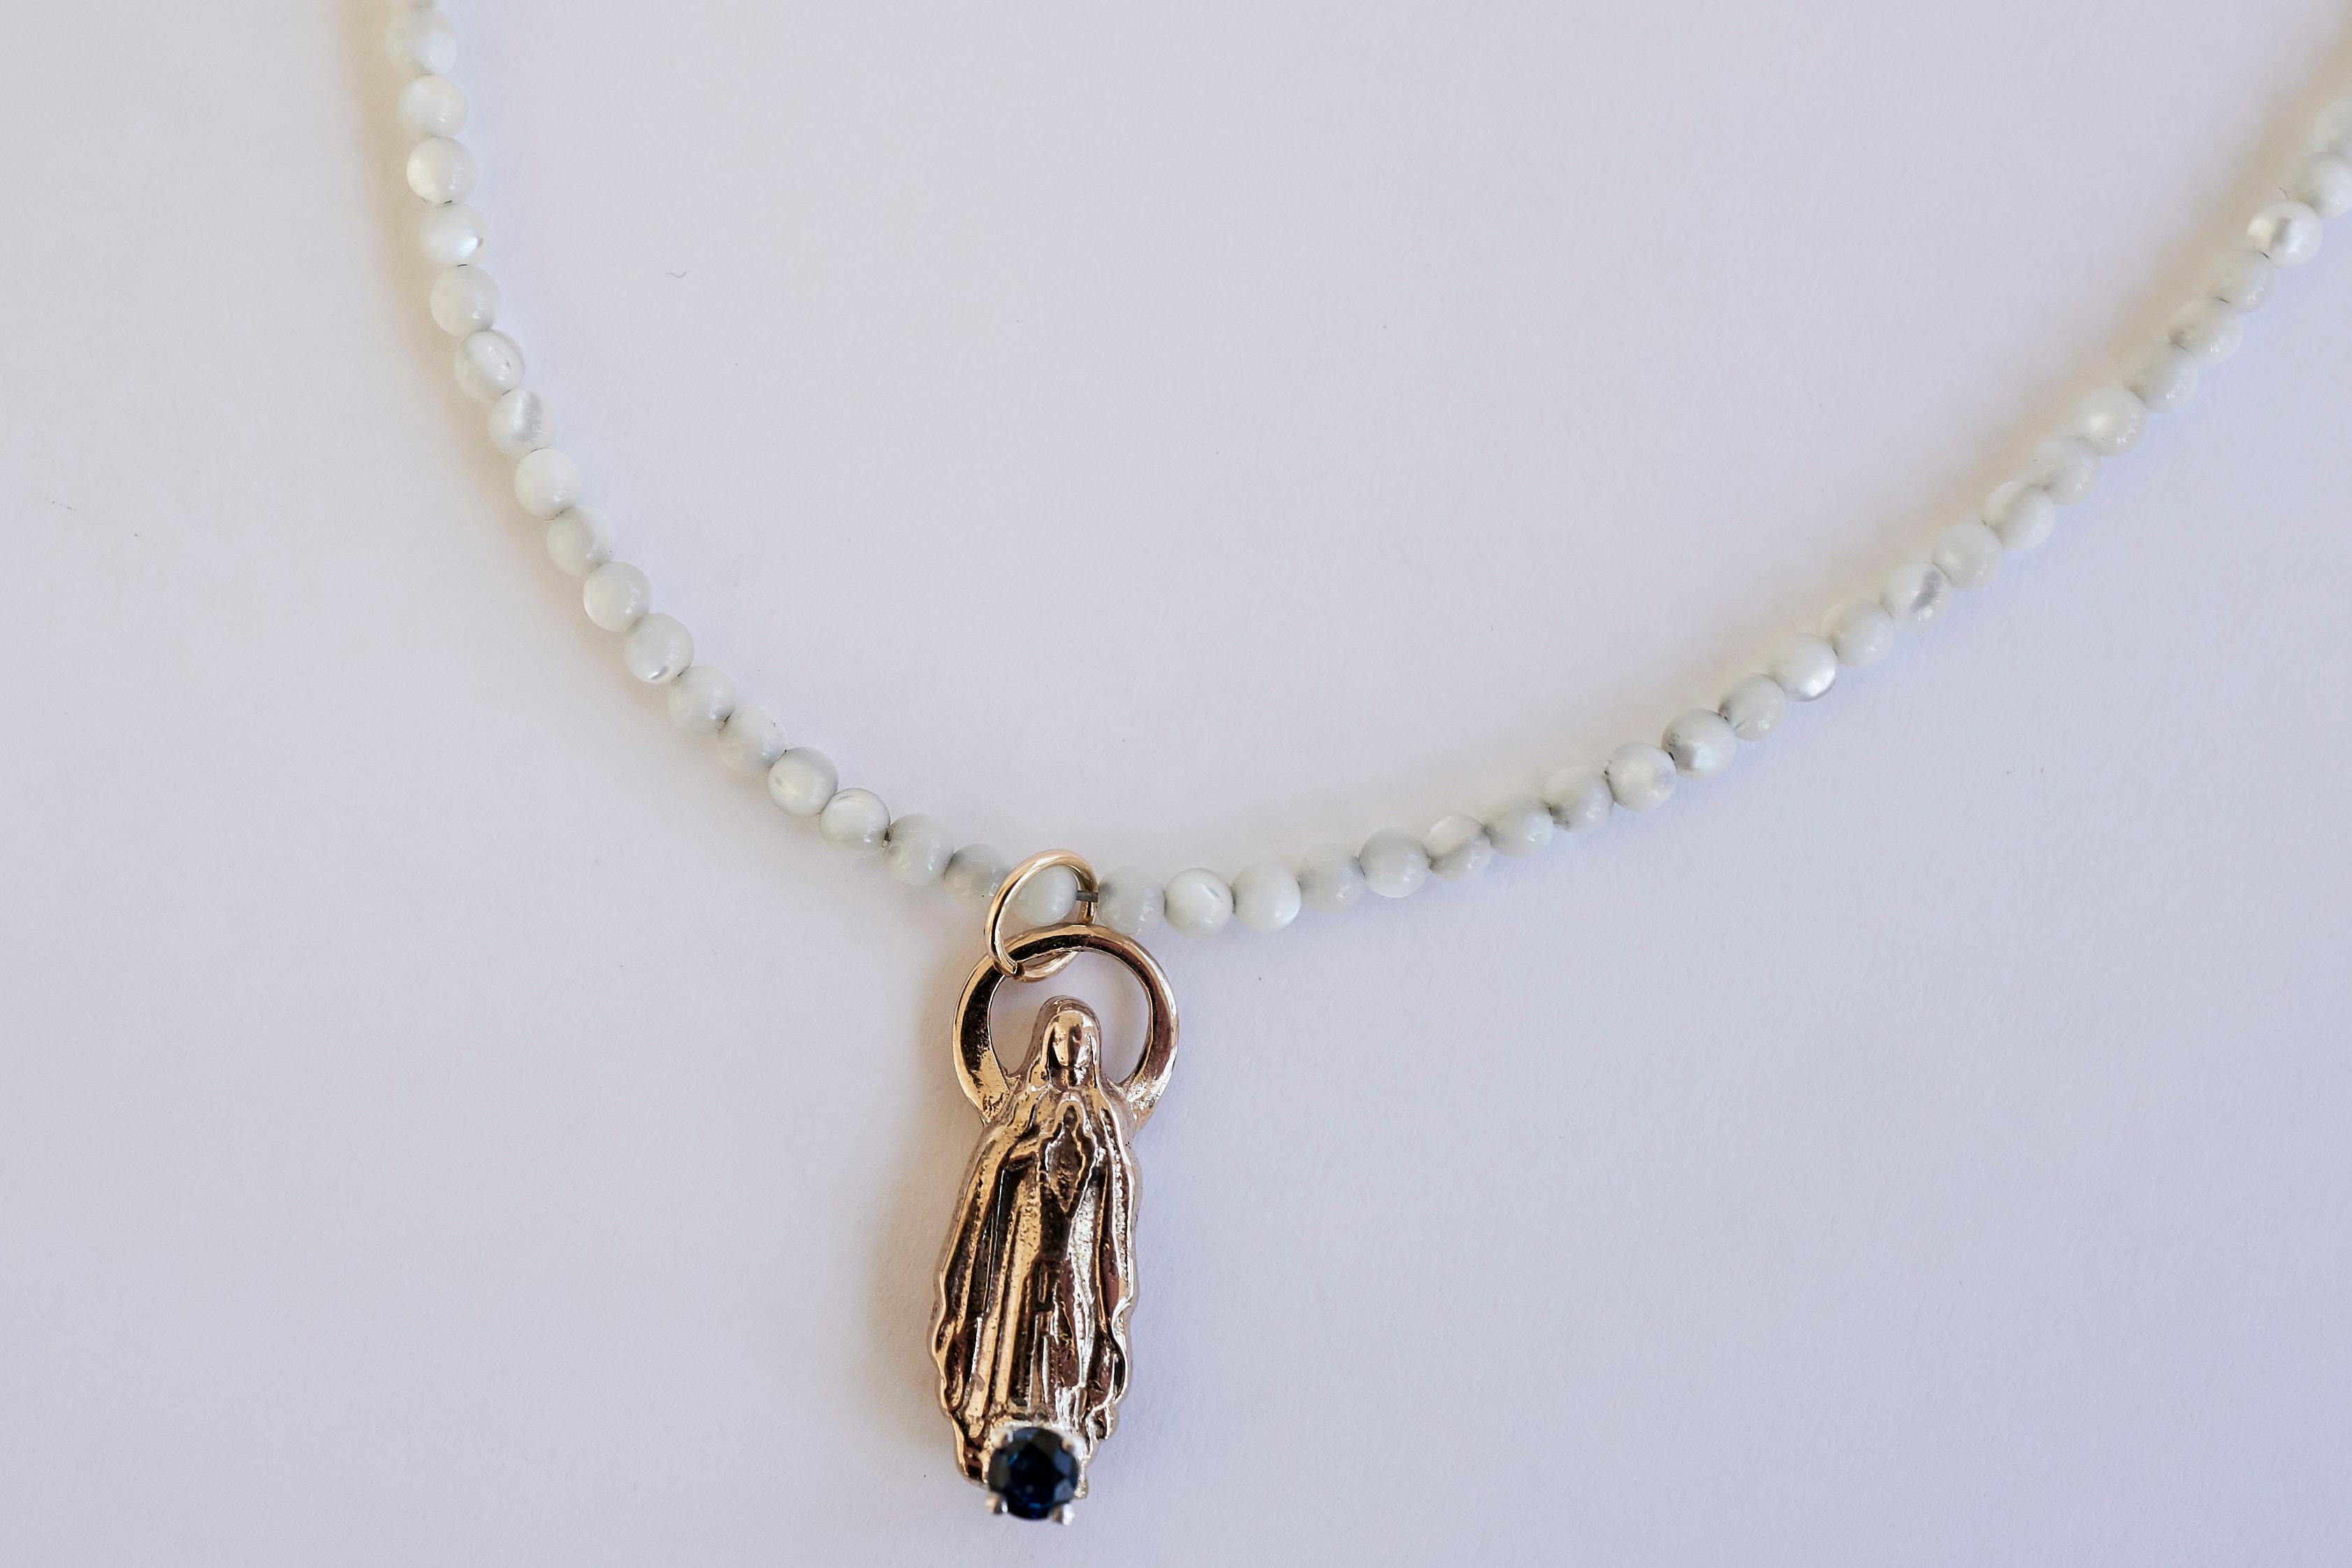 Brilliant Cut Sapphire Virgin Mary White Bead Necklace J Dauphin For Sale